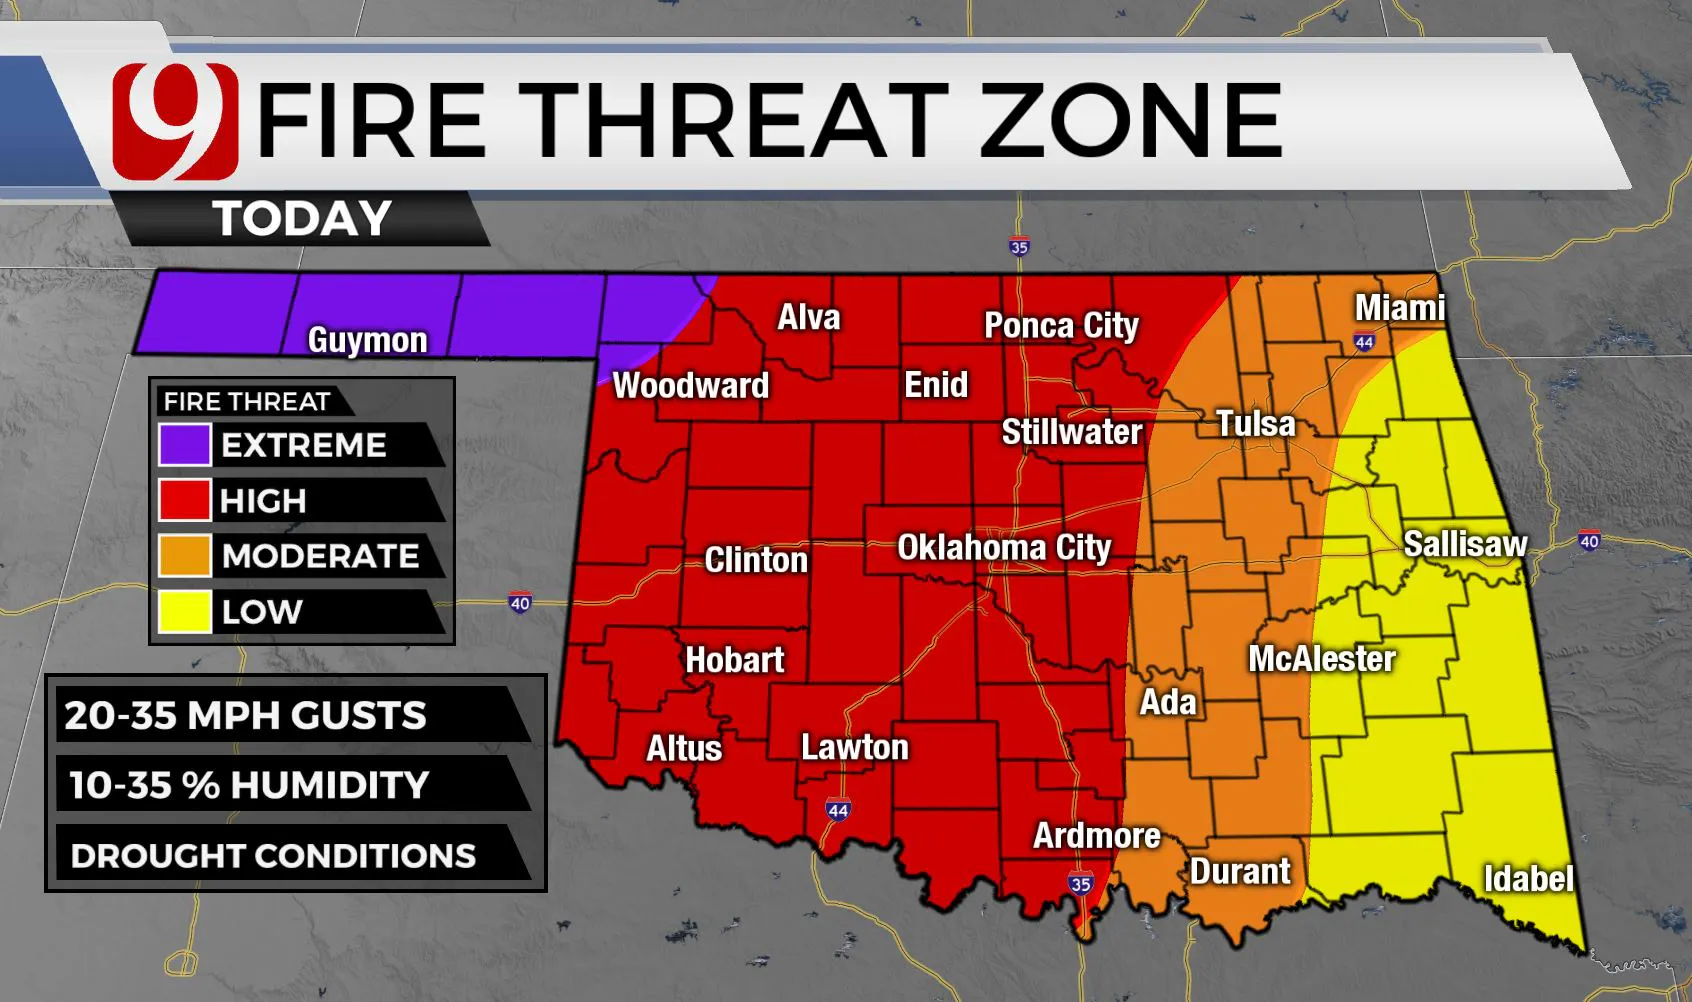 Fire threat zone on Monday.